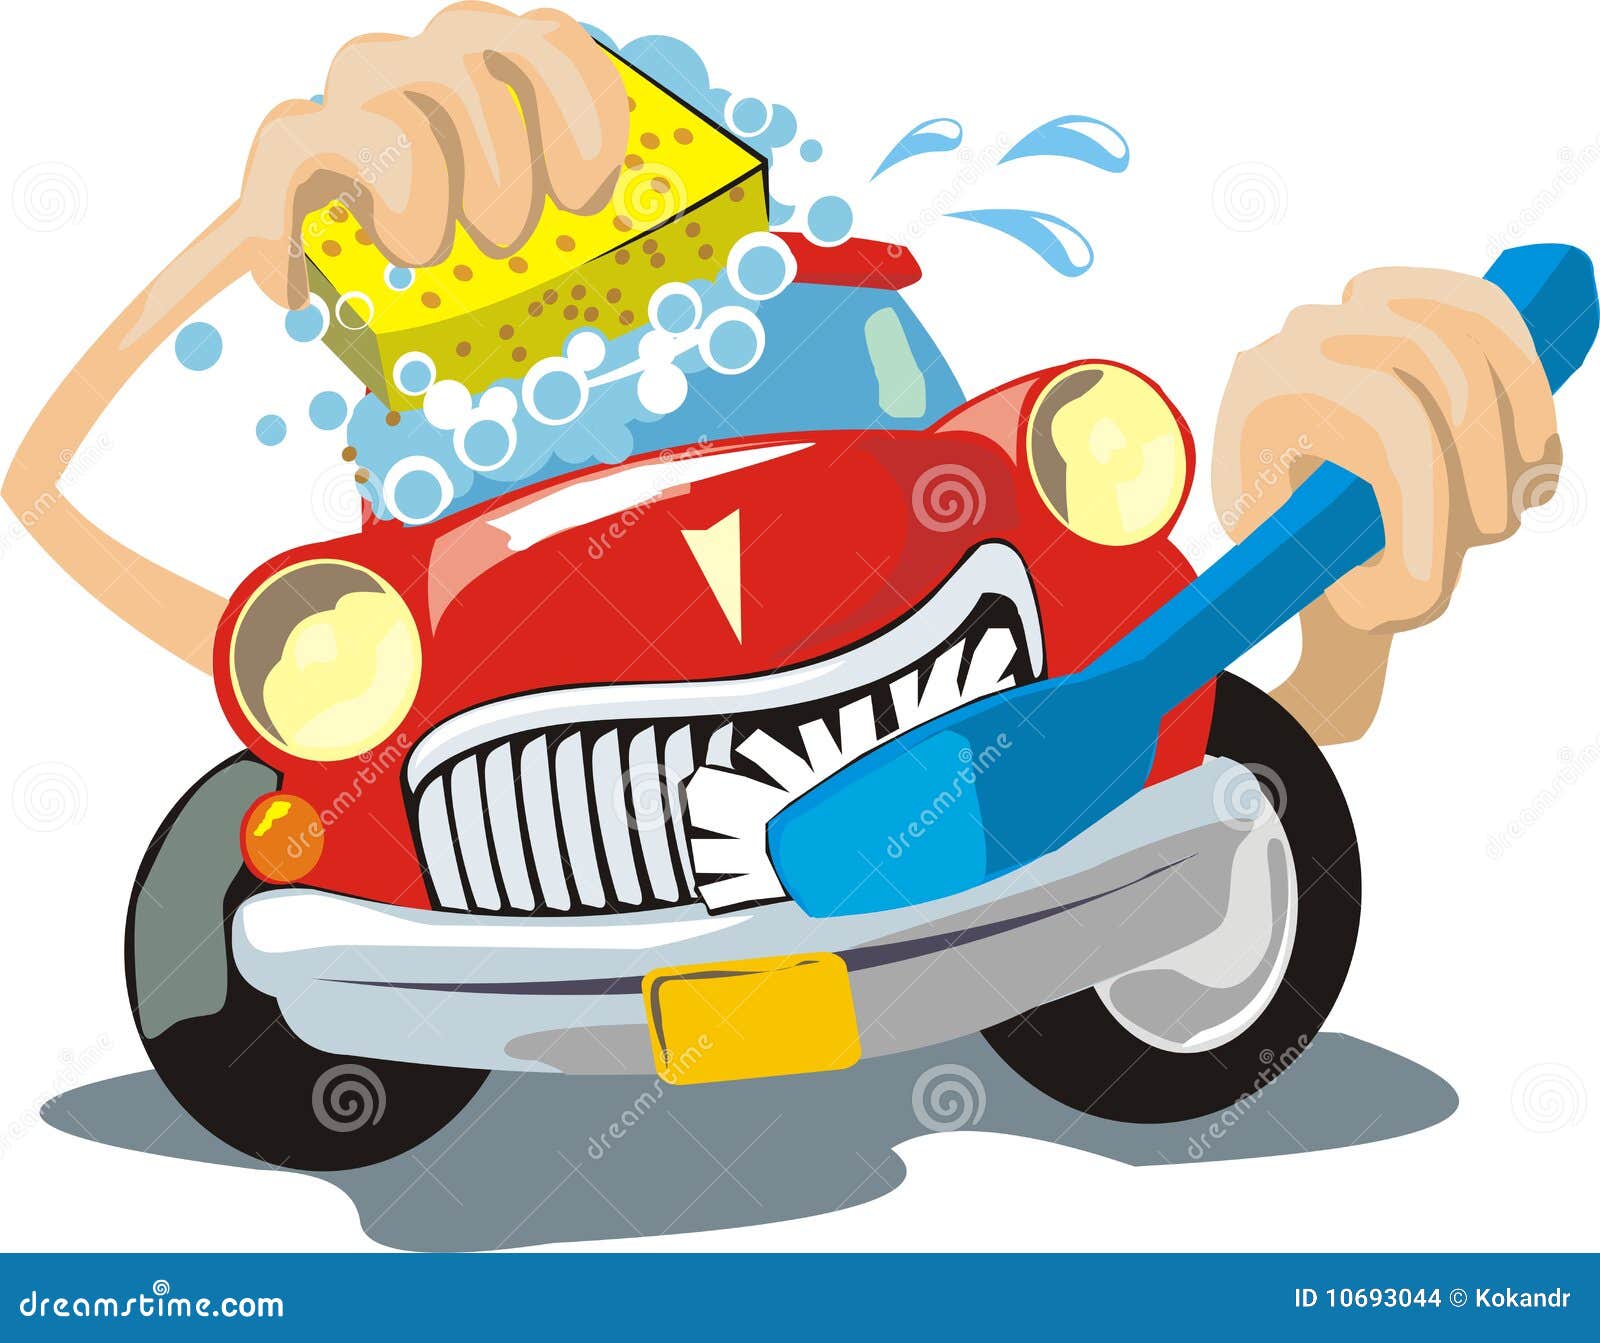 clipart for car wash - photo #29